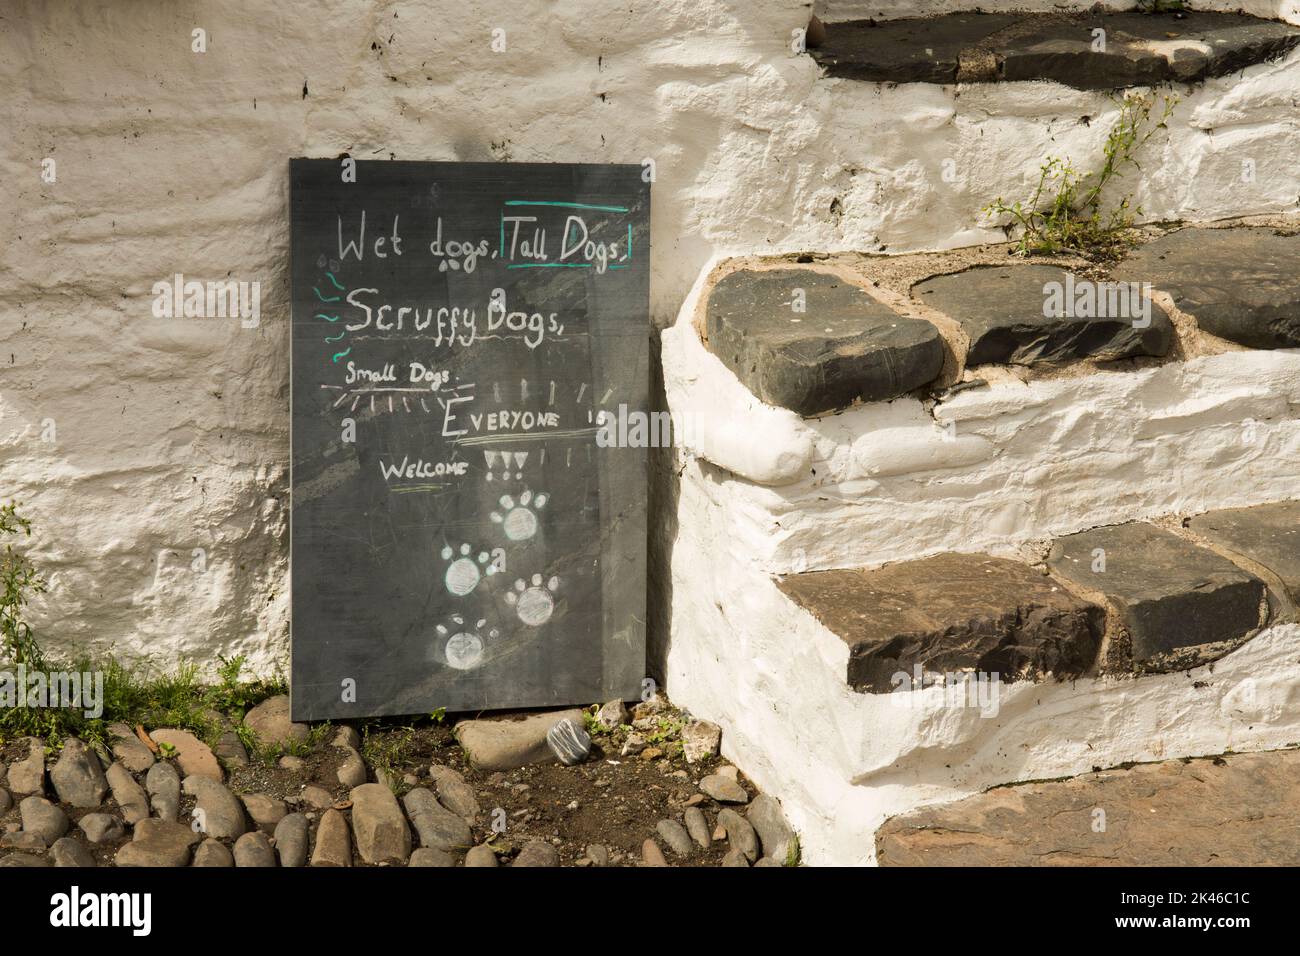 humorous pub sign welcoming dogs even if they are scruffy and wet, in Clovelly village, Devon, England Stock Photo